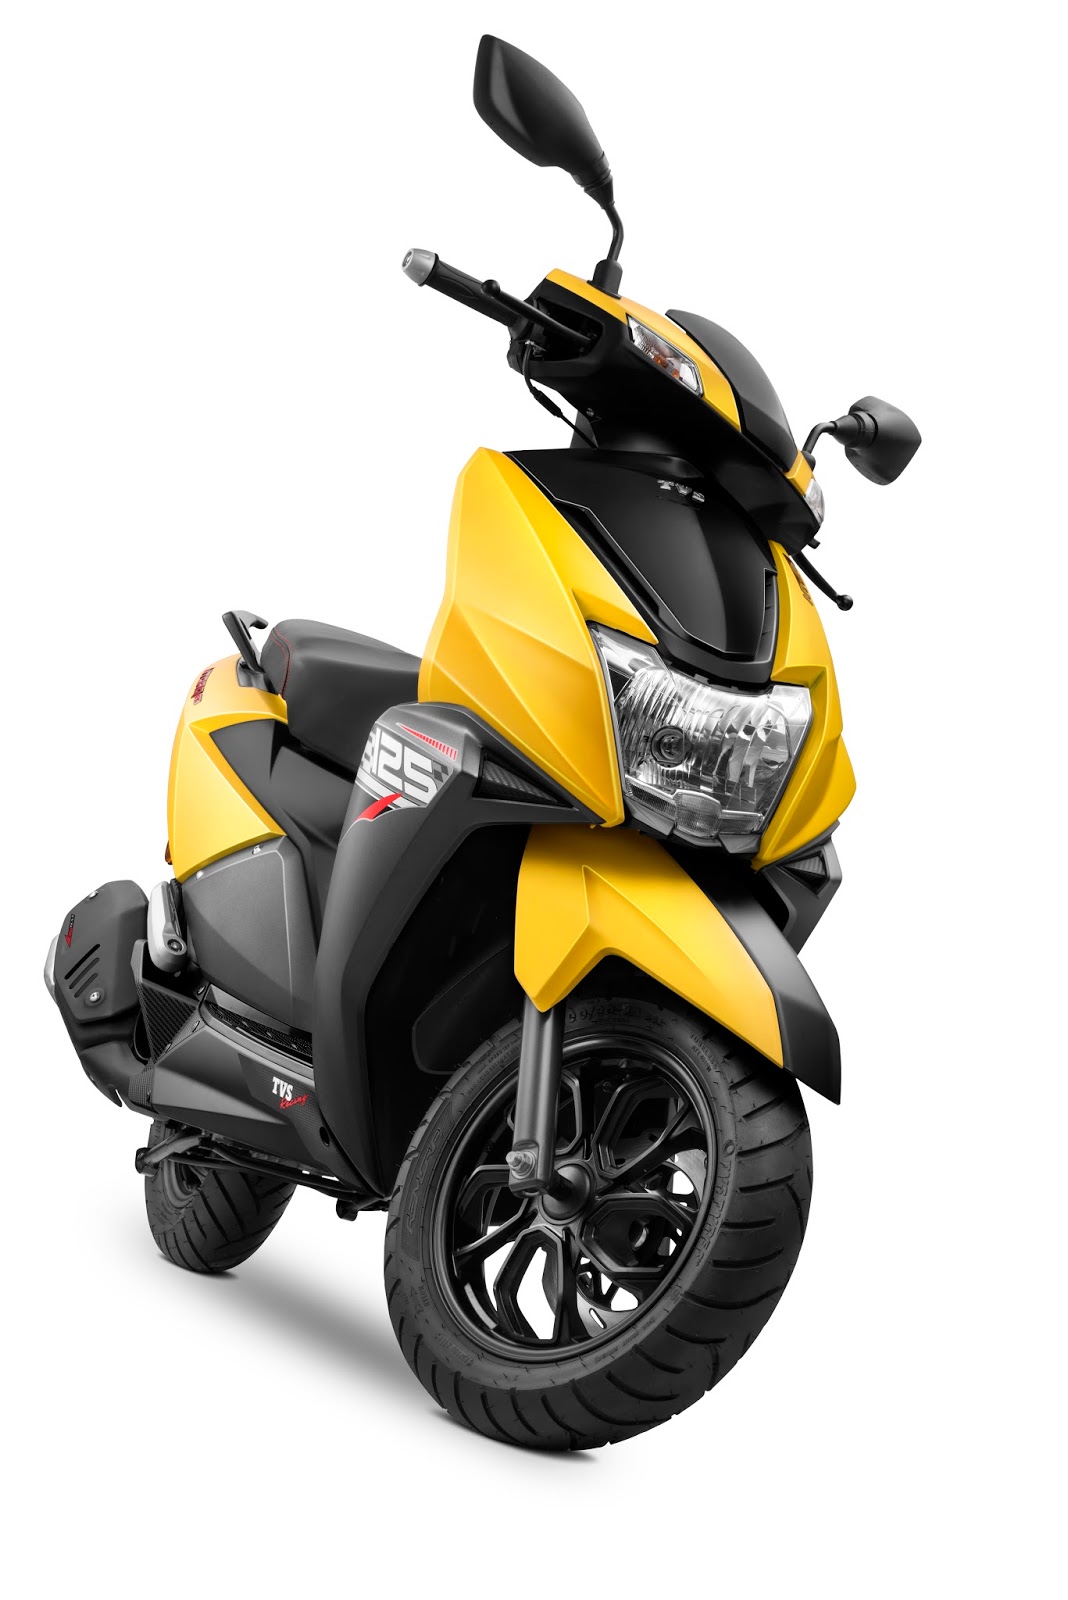 tvs scooters 125cc